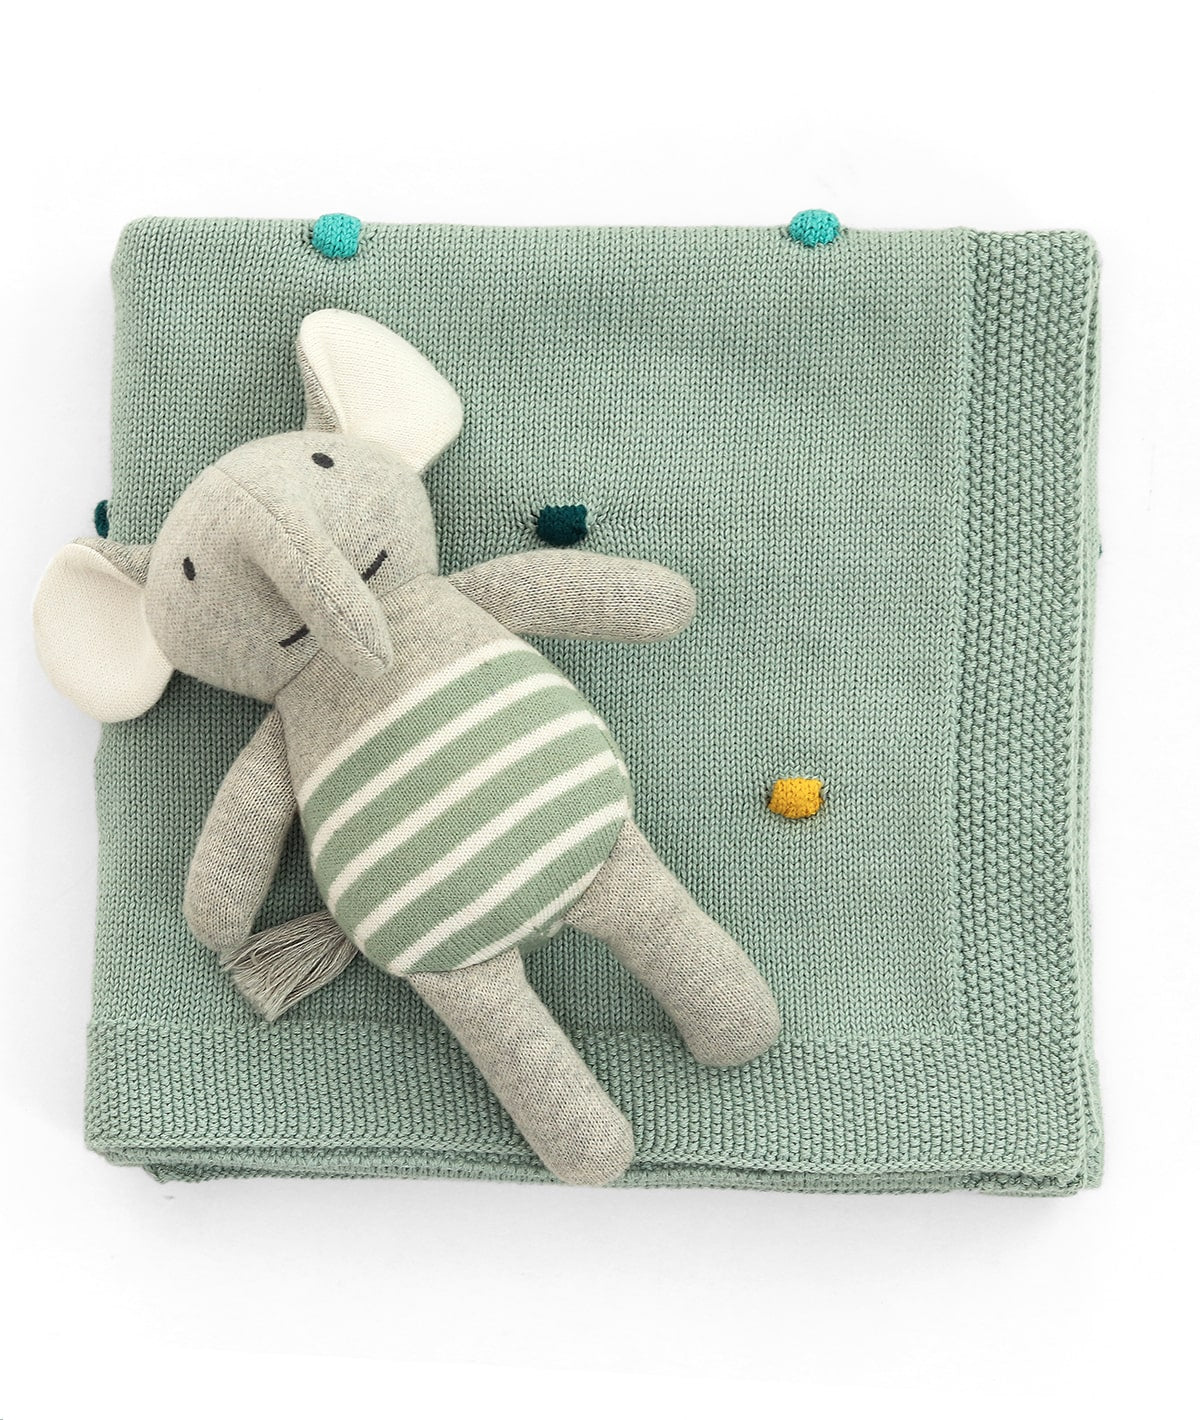 Cute as a Button Gift Bundle- (Set of 2 - Blanket & Elephant Rattle) in Duck Egg Color